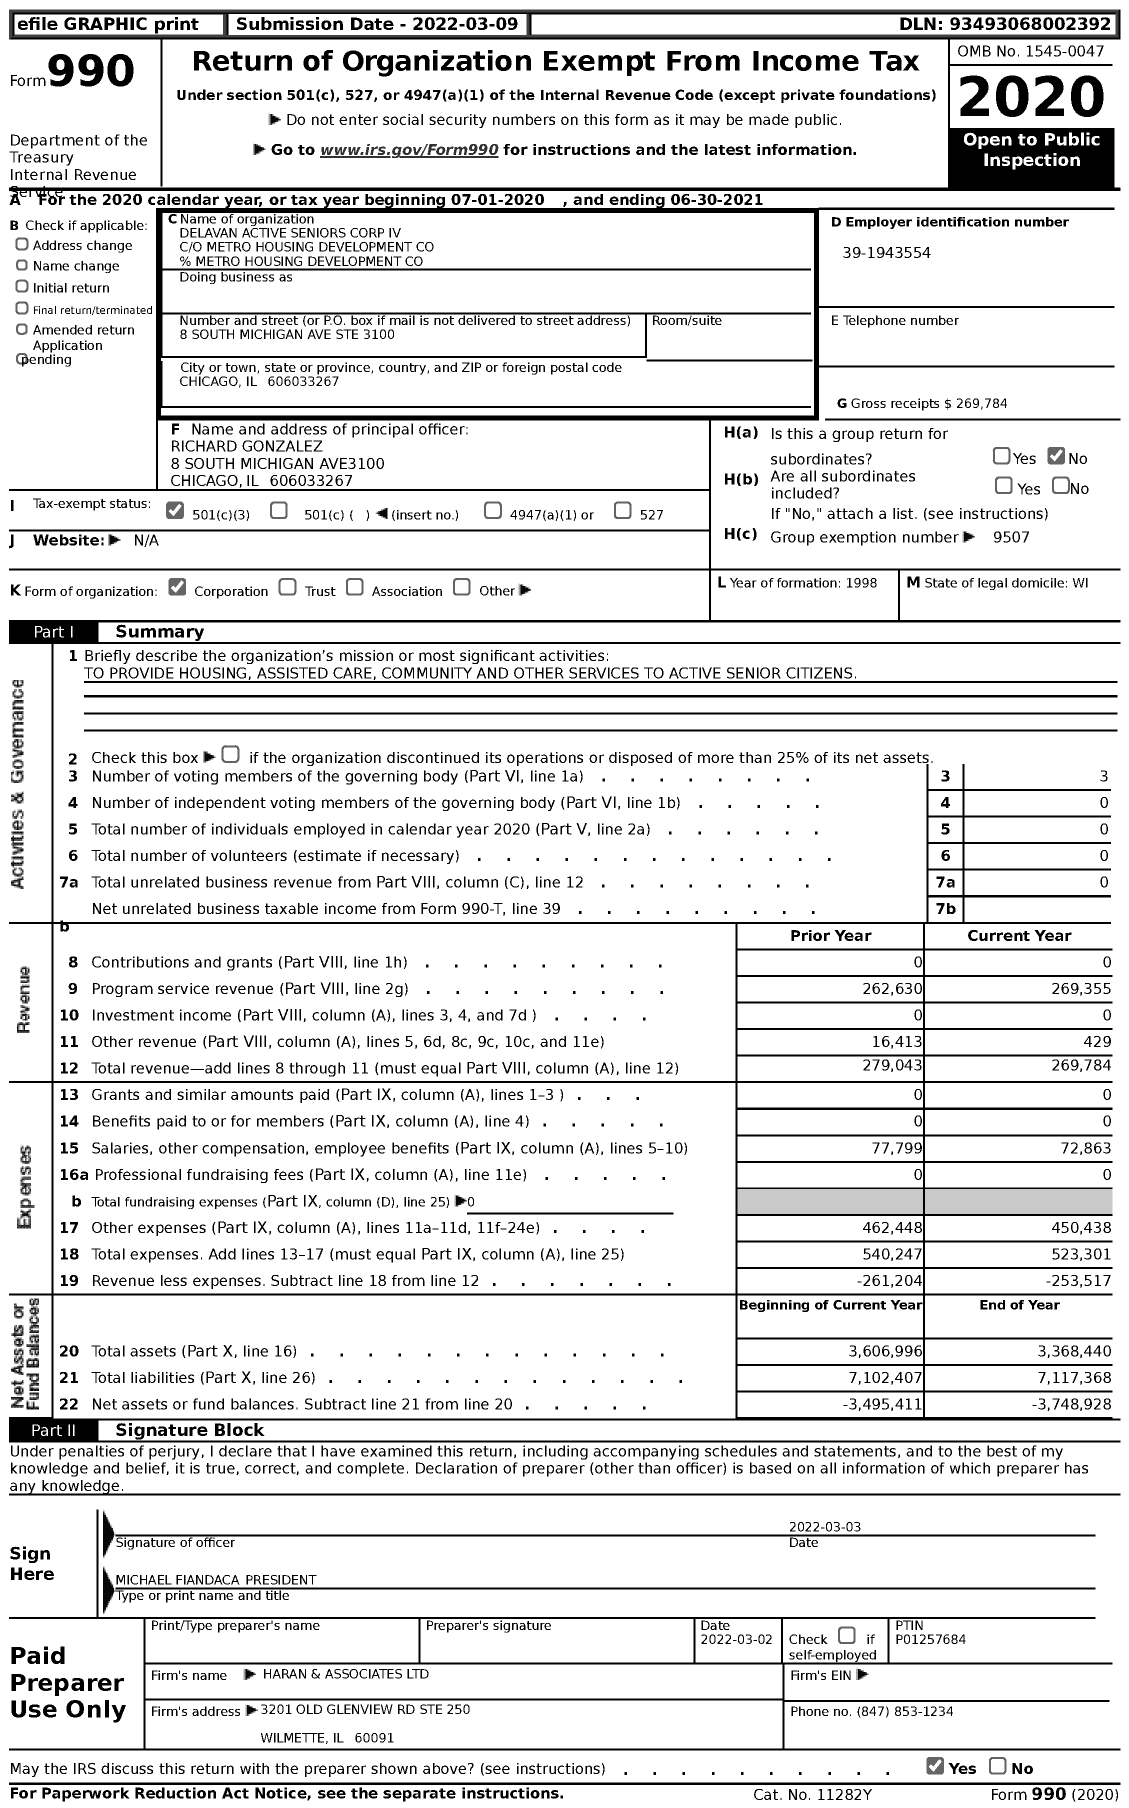 Image of first page of 2020 Form 990 for Delavan Active Seniors Corp Iv